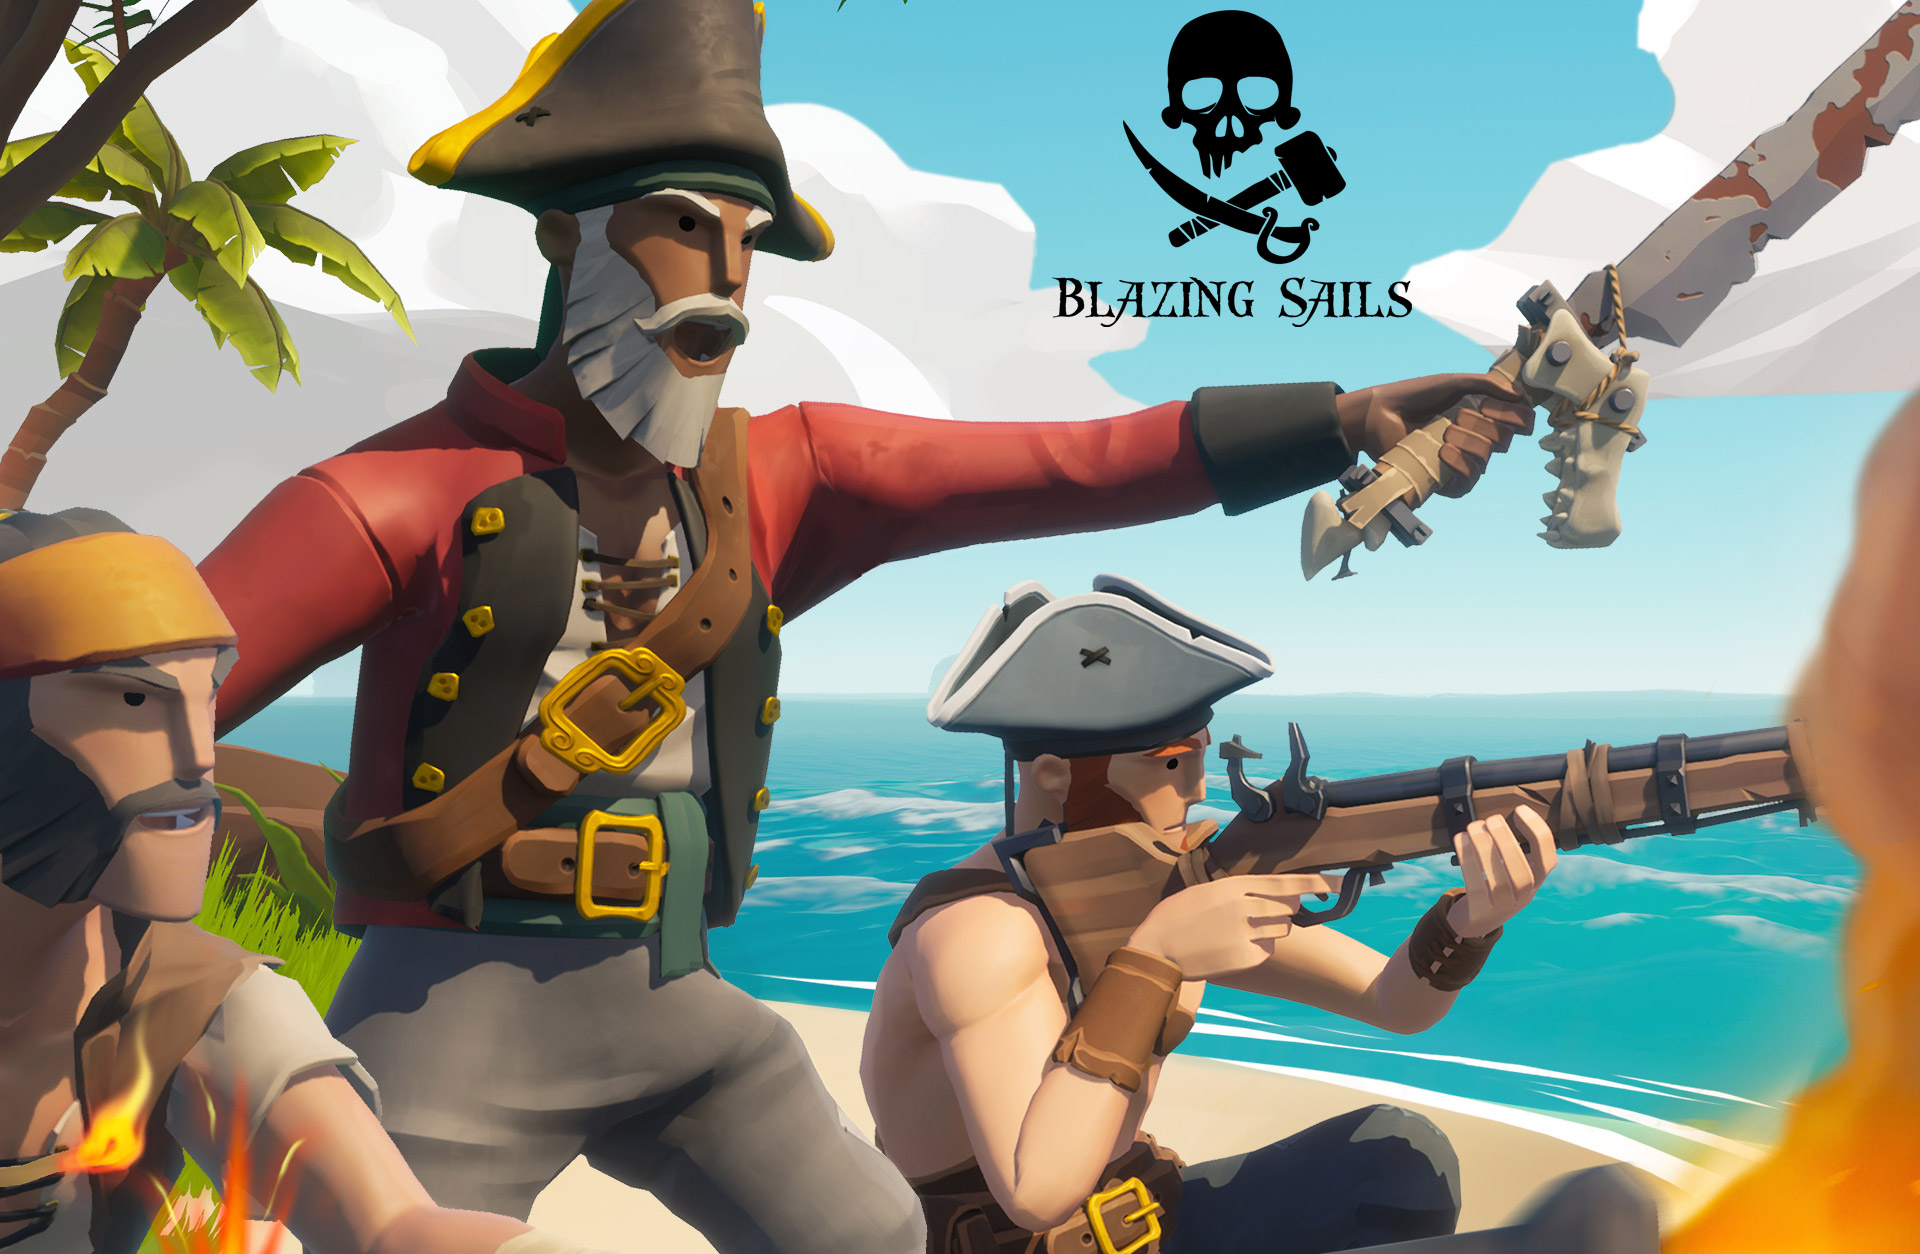 Sea of thieves ps4. Blazing Sails: Pirate Battle Royale 2020. Blazing Sails Sea of Thieves. Sea of Thieves ps4 цена.